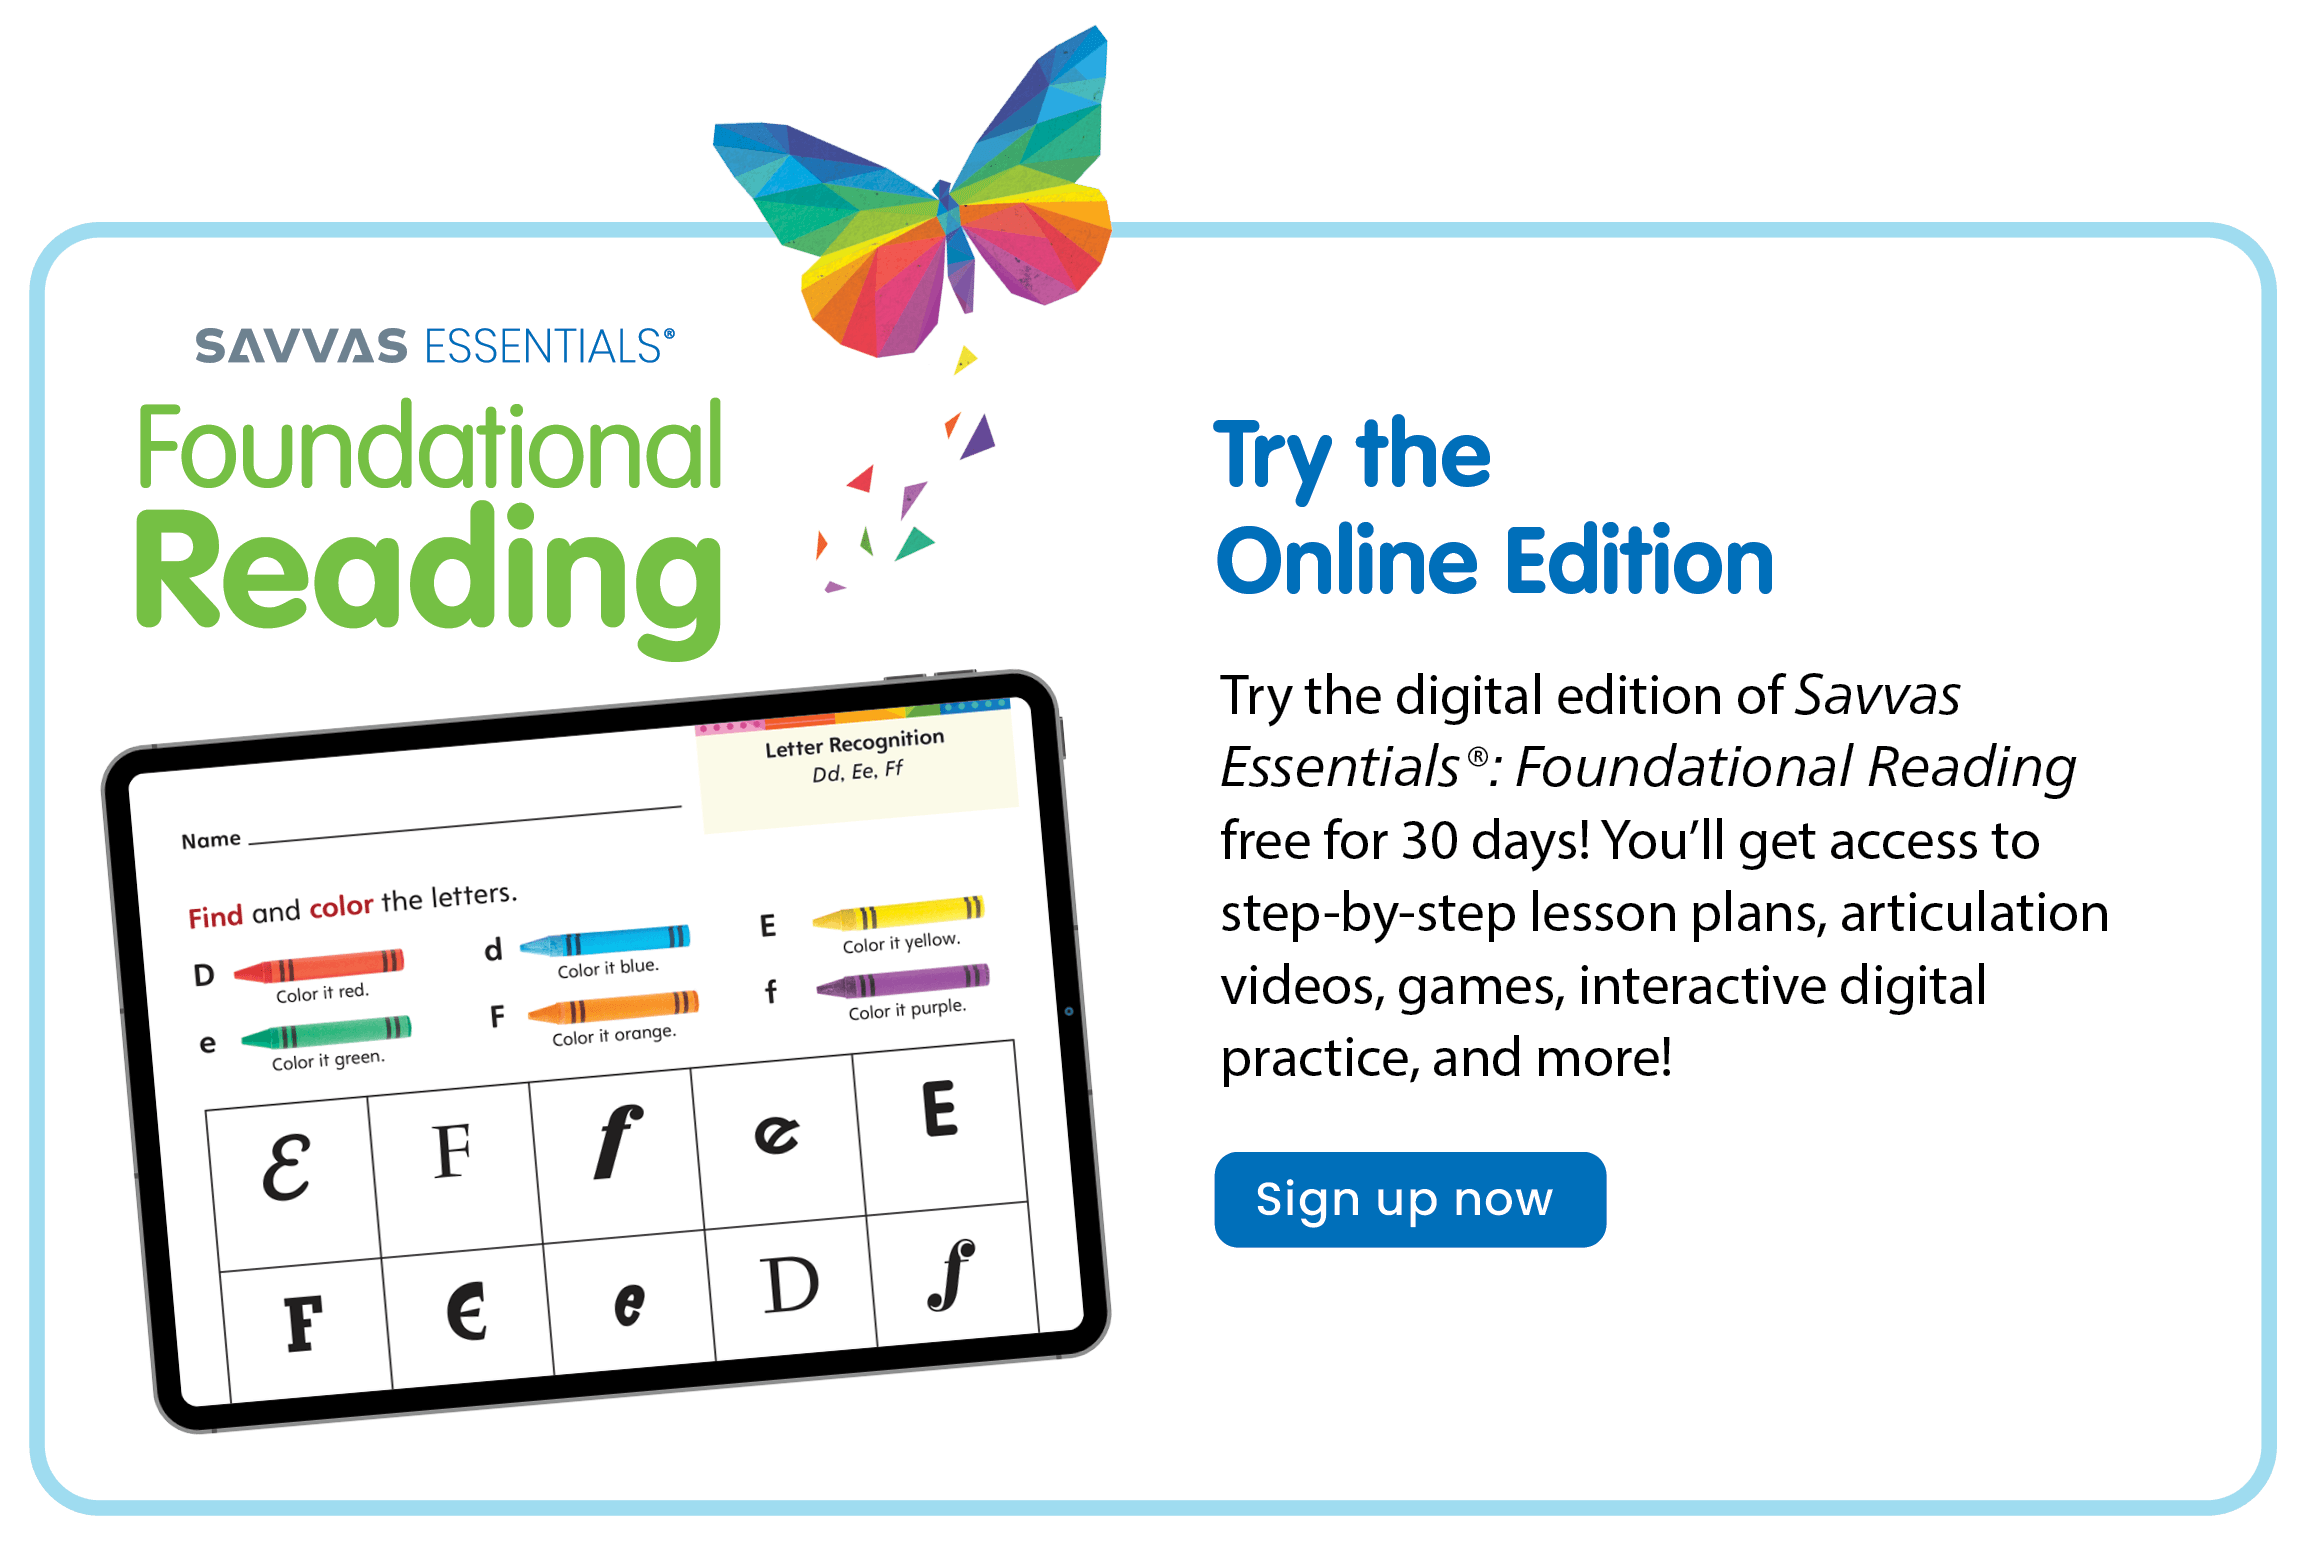 Image of a lesson from Savvas Essentials: Foundational Reading, a program that targets phonological awareness and phonemic awareness. Link to sign up for a free trial.